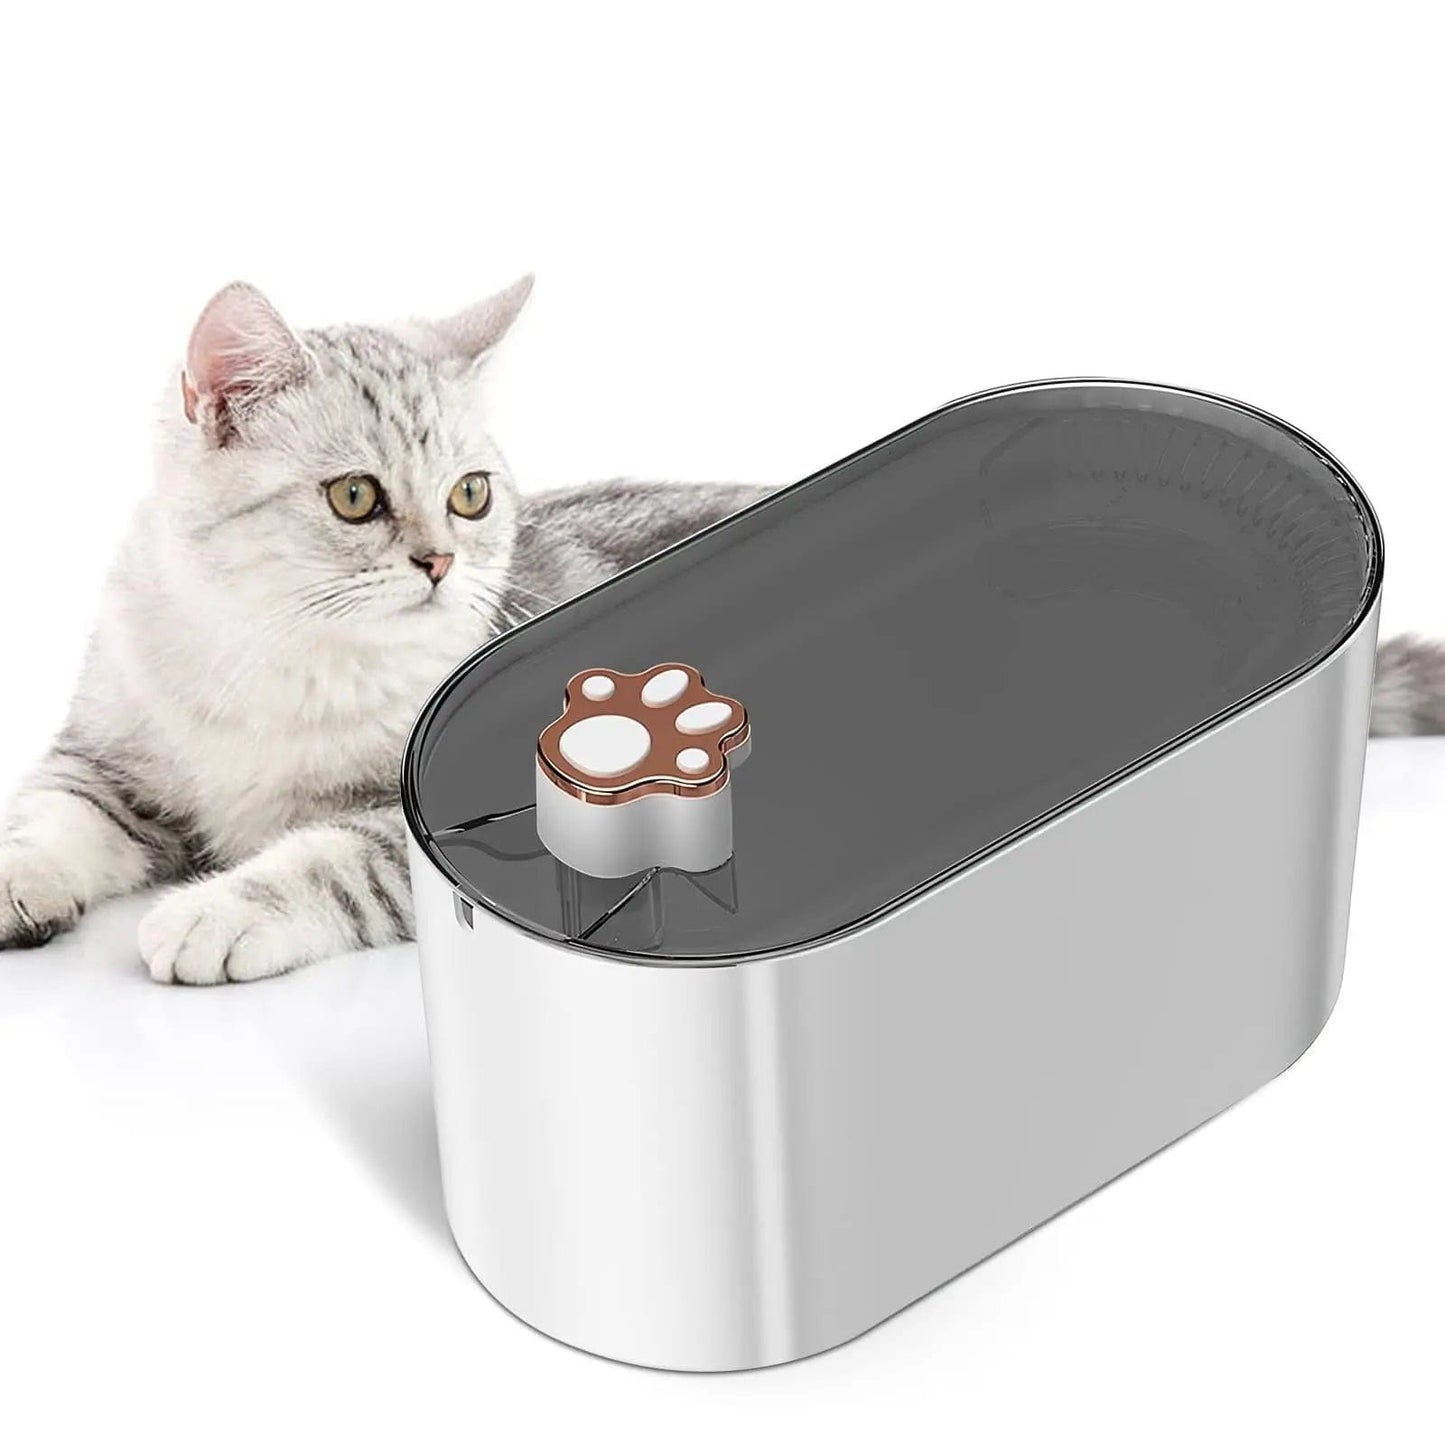 3L Automatic Pet Water Fountain...Ultra-Quiet w/ LED Light